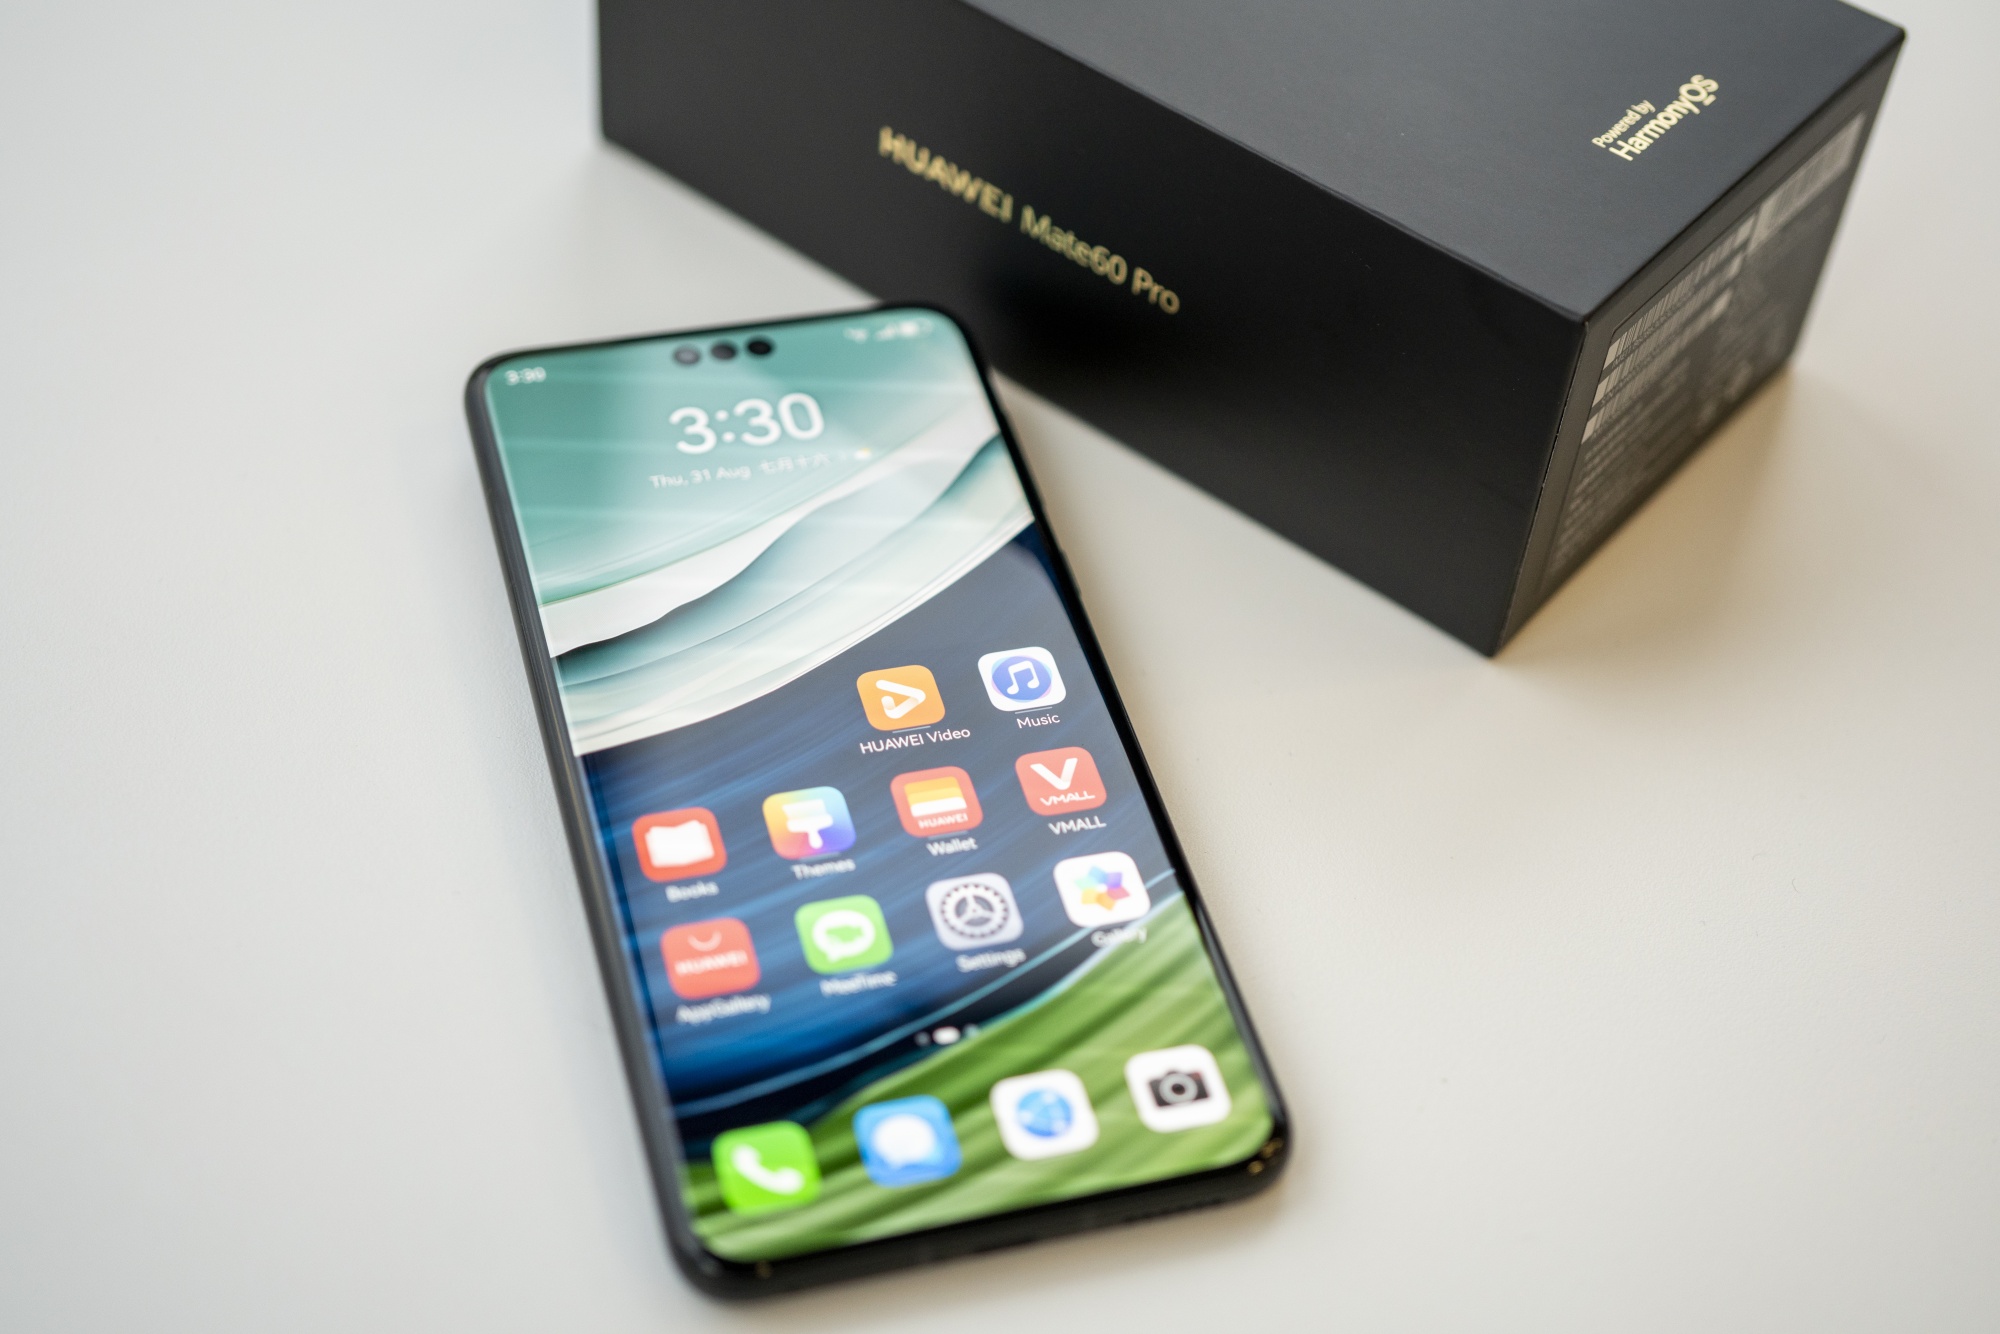 Huawei Mate 60 Pro Contributed to Company Rebound, Alibaba Fell - Bloomberg